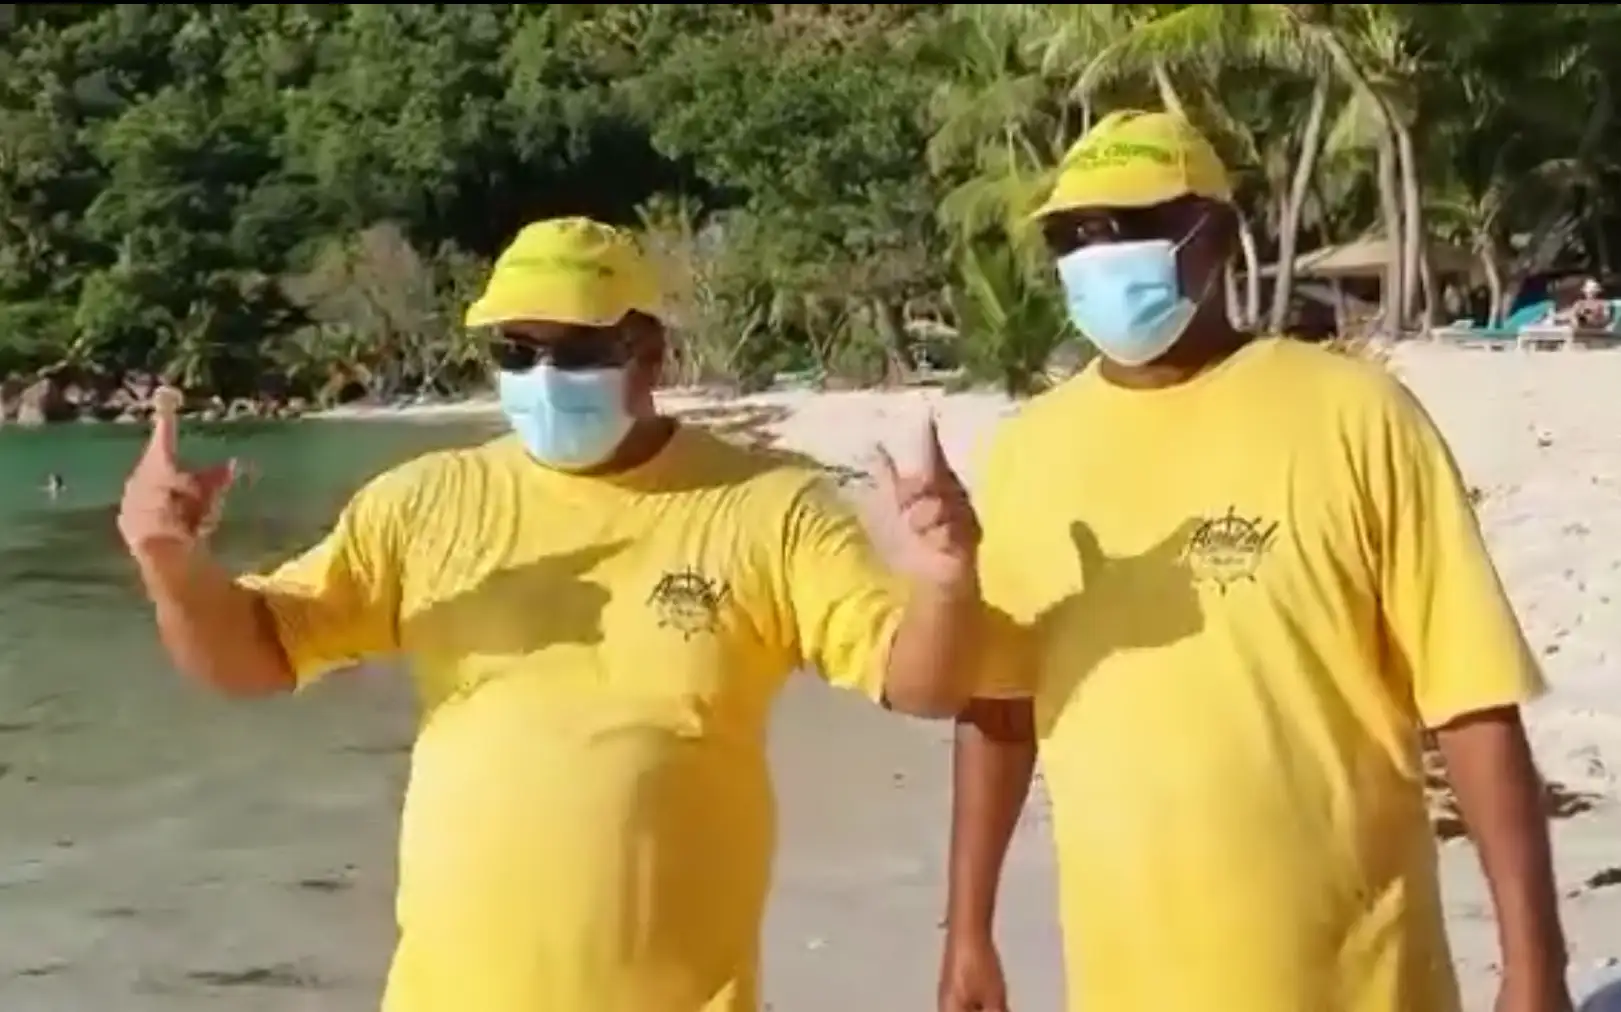 Tough times during COVID. Had to wear masks every day in the Seychelles heat.